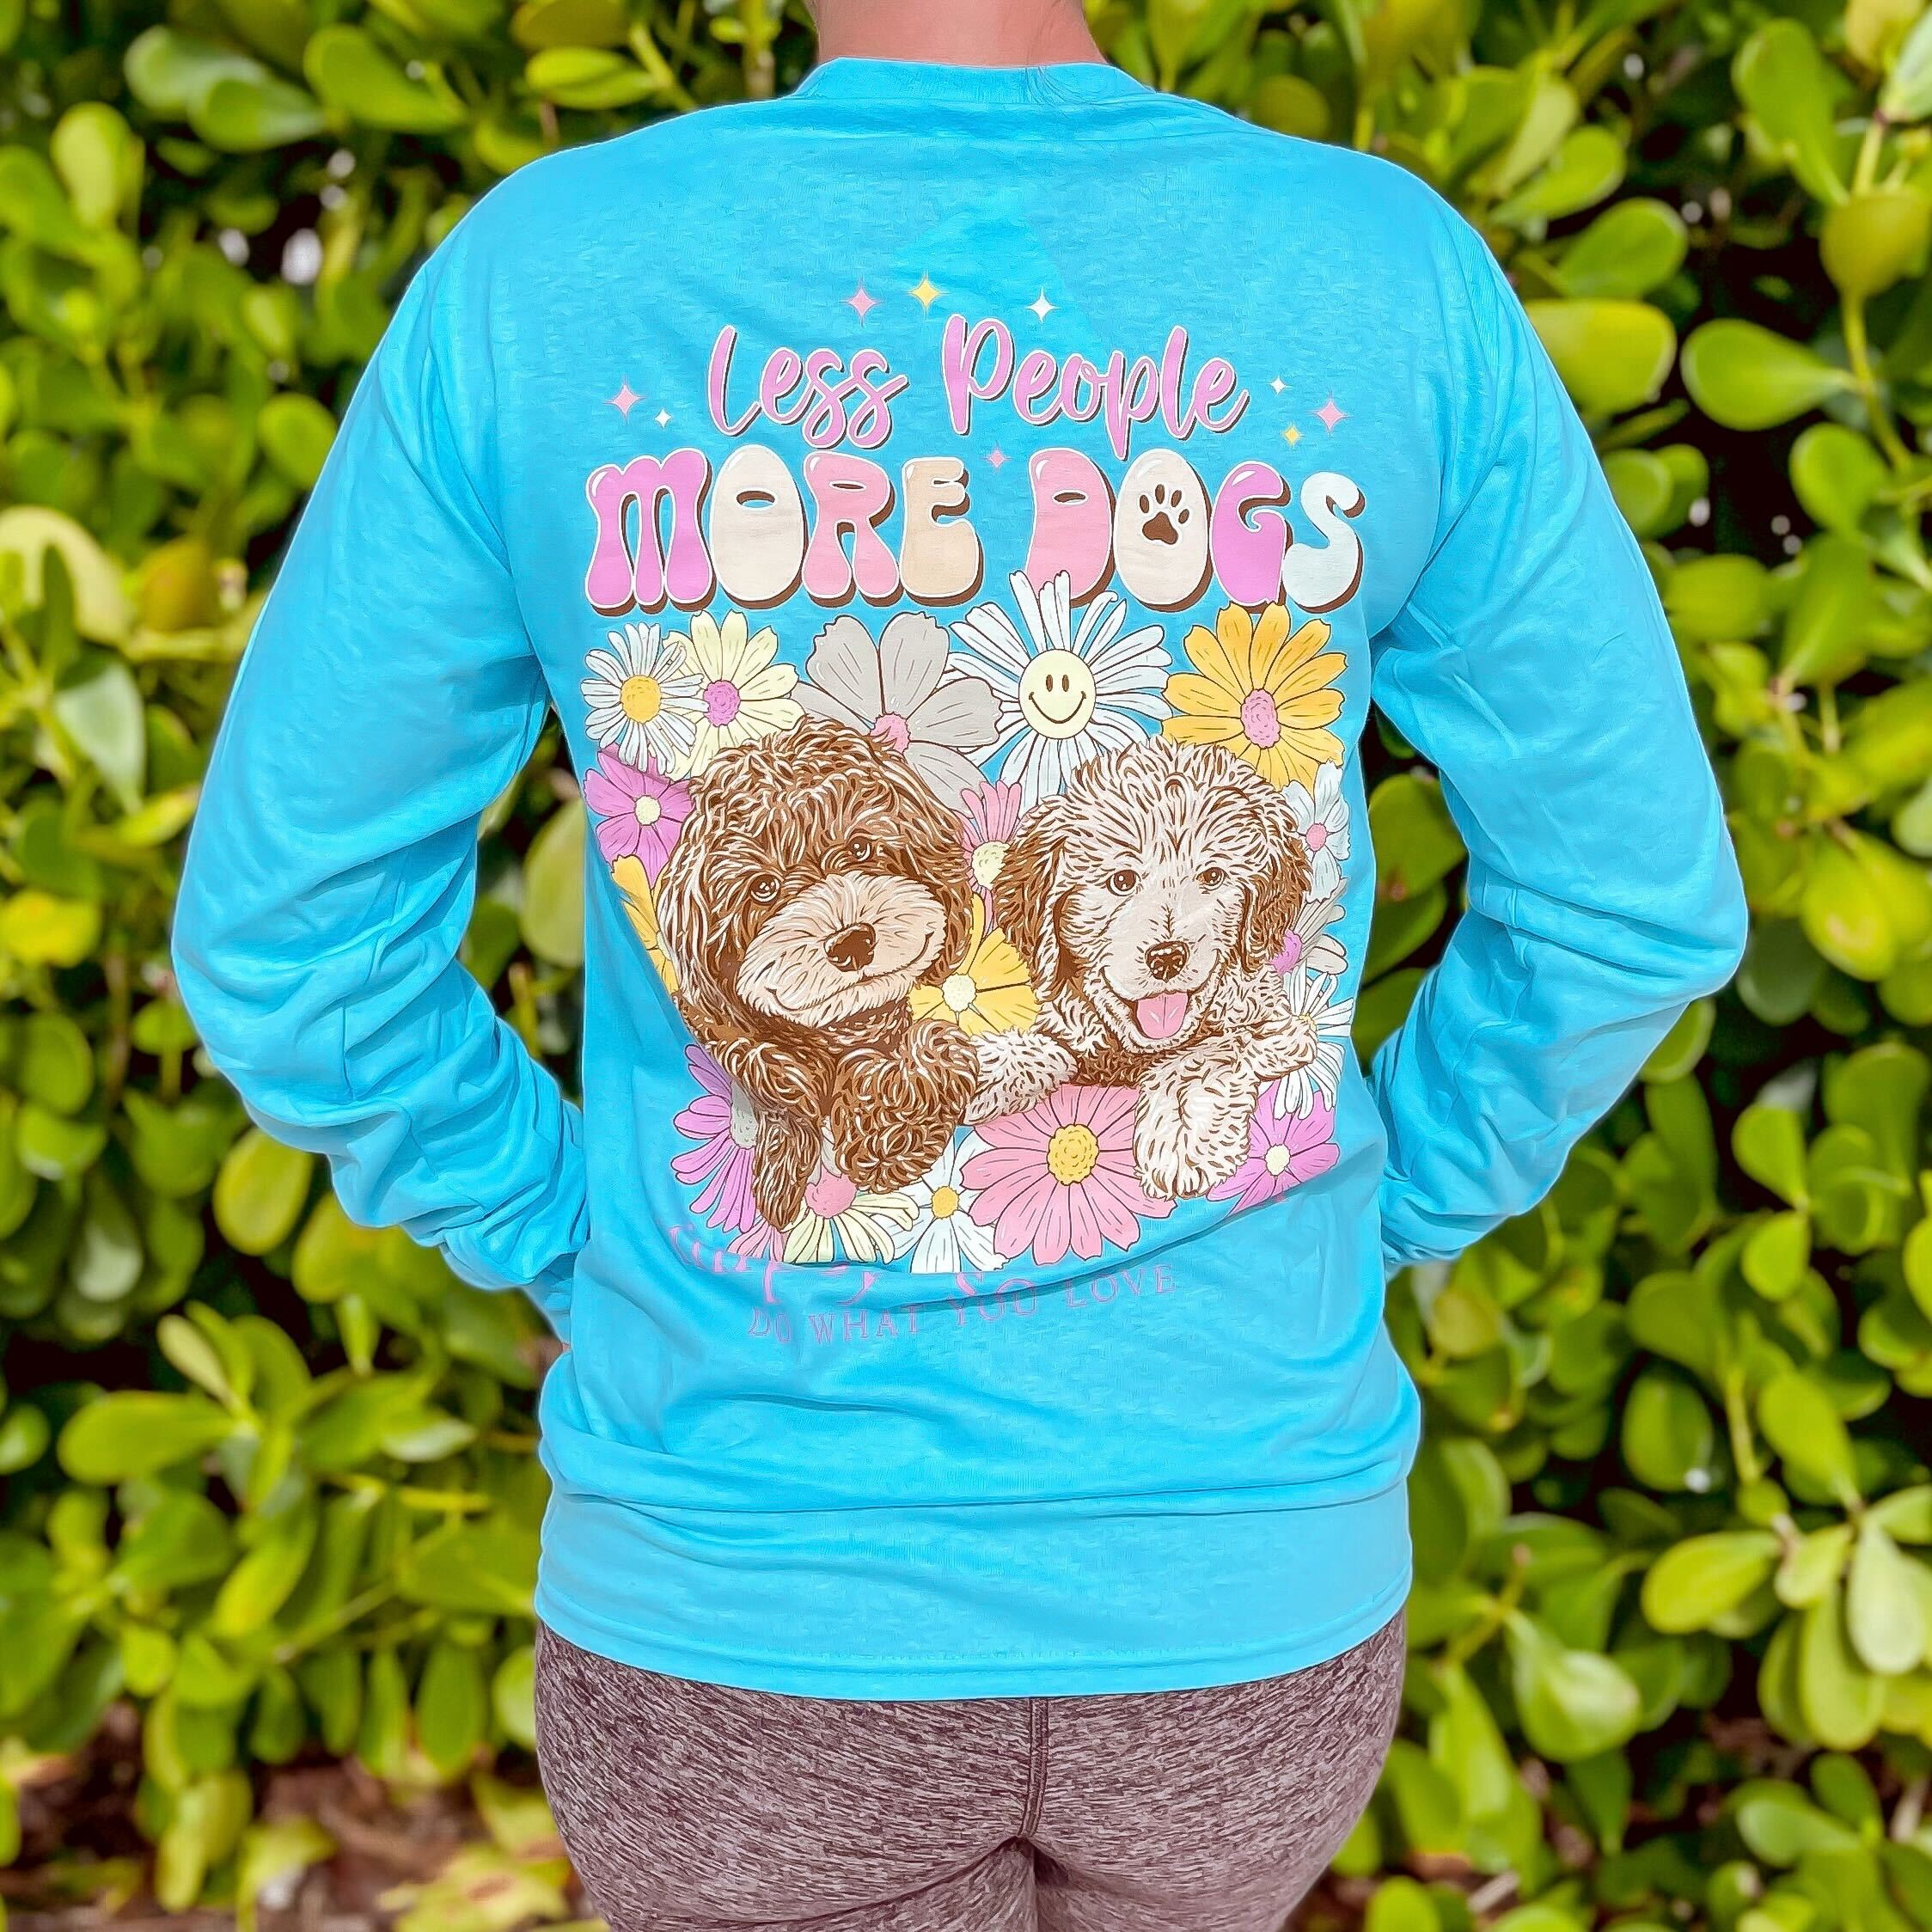 'Less People More Dogs' Long Sleeve Tee by Simply Southern